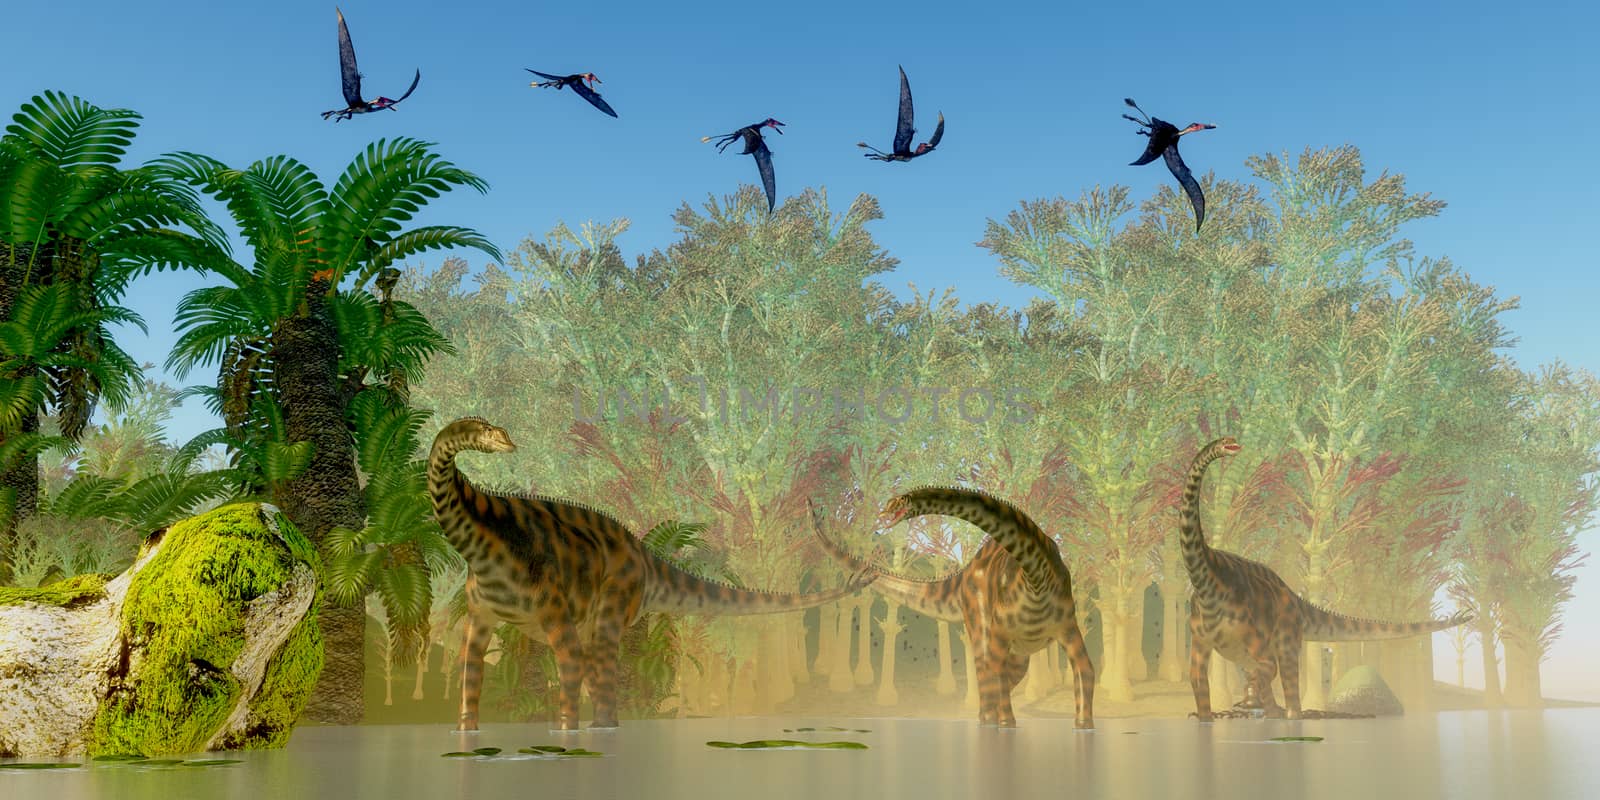 A flock of Dorygnathus reptiles fly over a herd of Spinophorosaurus sauropod dinosaurs in a Jurassic swamp.